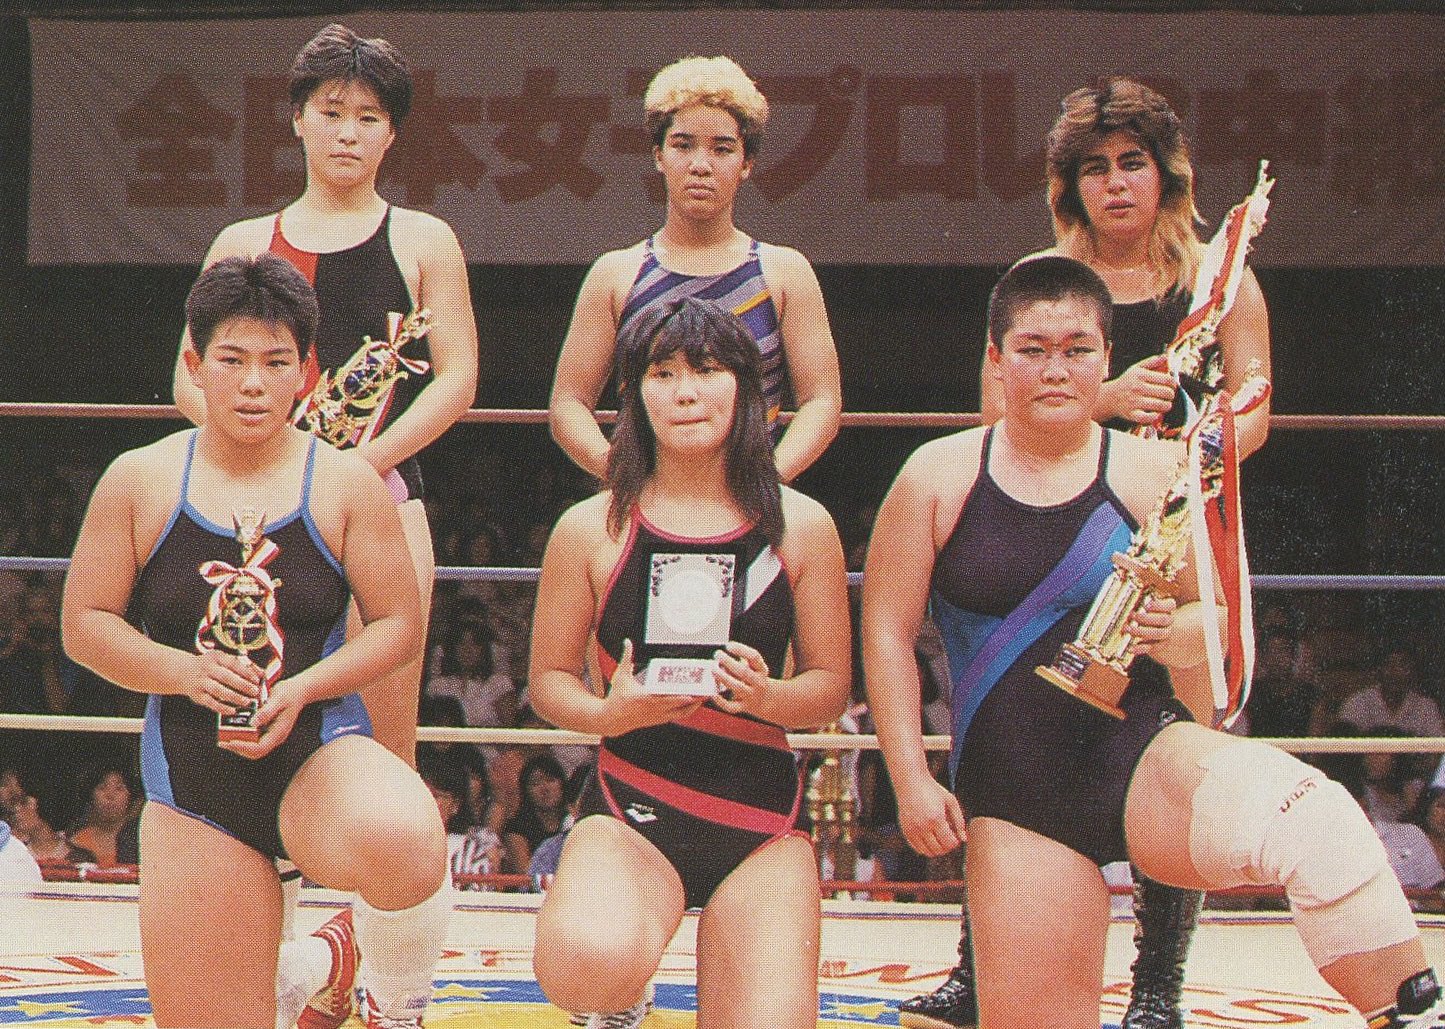 Competitors of the 1987 AJW Juniors Tournament lined up together inside the ring.